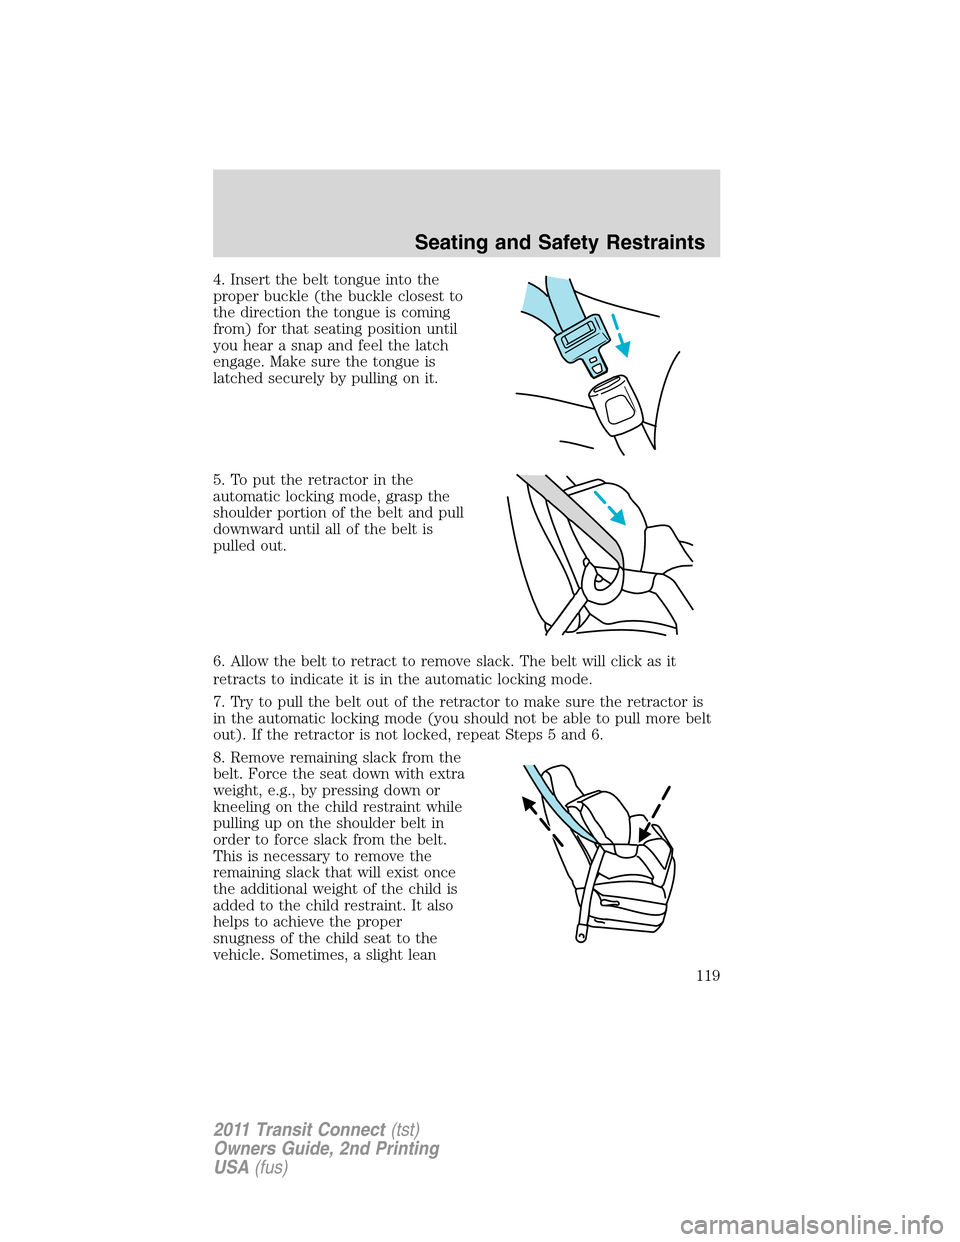 FORD TRANSIT CONNECT 2011 1.G Owners Manual 4. Insert the belt tongue into the
proper buckle (the buckle closest to
the direction the tongue is coming
from) for that seating position until
you hear a snap and feel the latch
engage. Make sure th